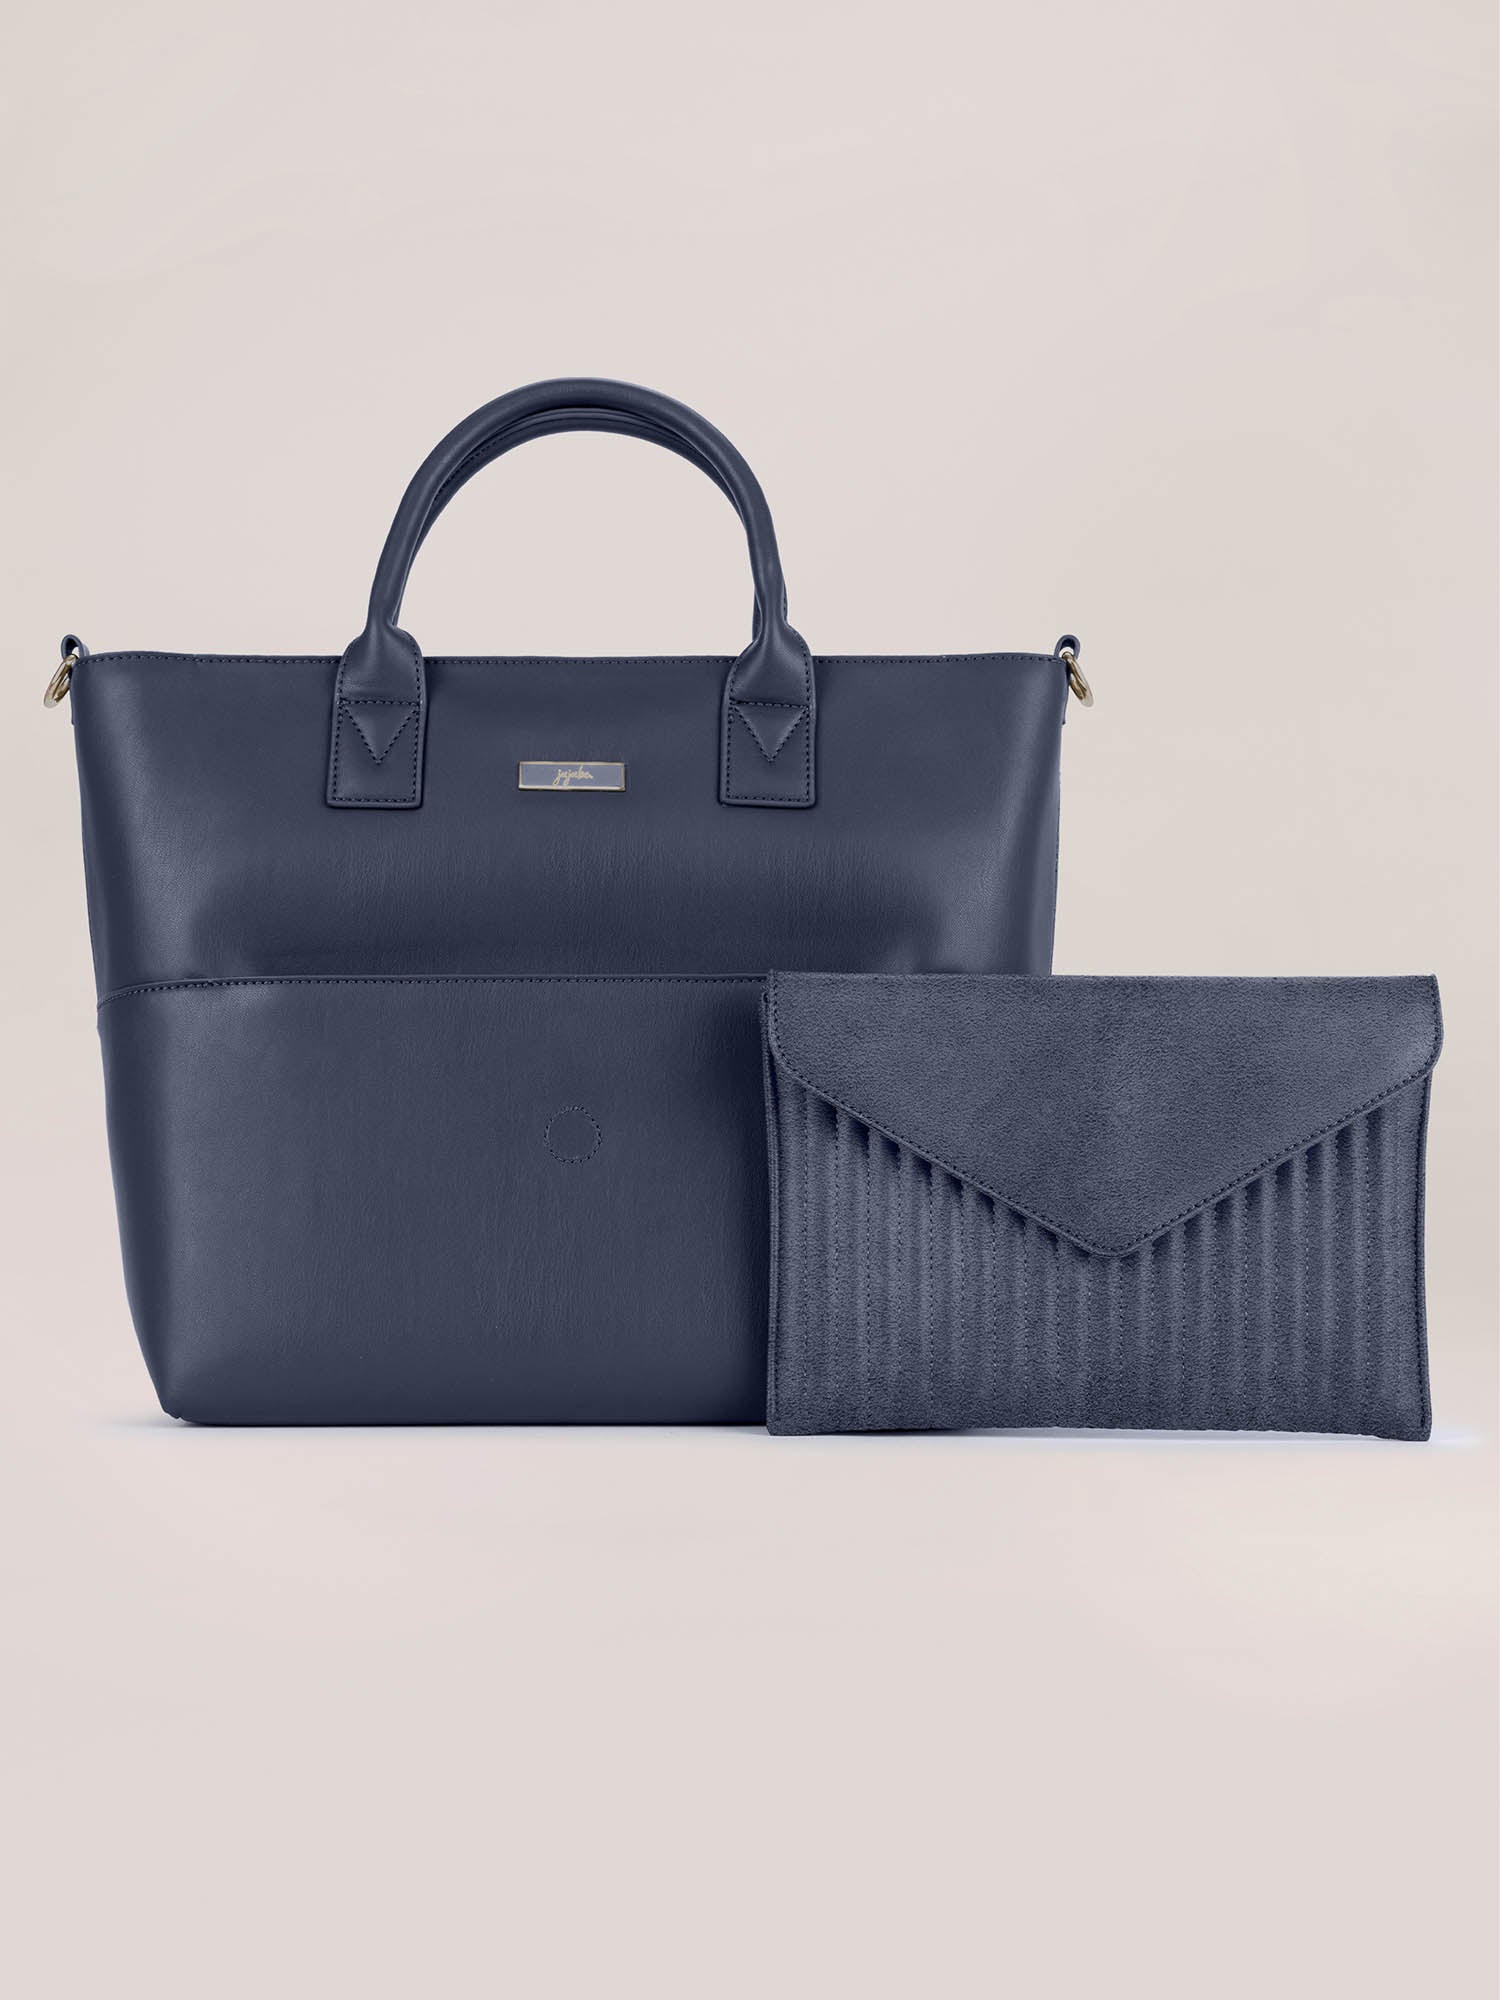 Navy Blue 24-7 Tote Bag with After Hours Clutch separate Front View